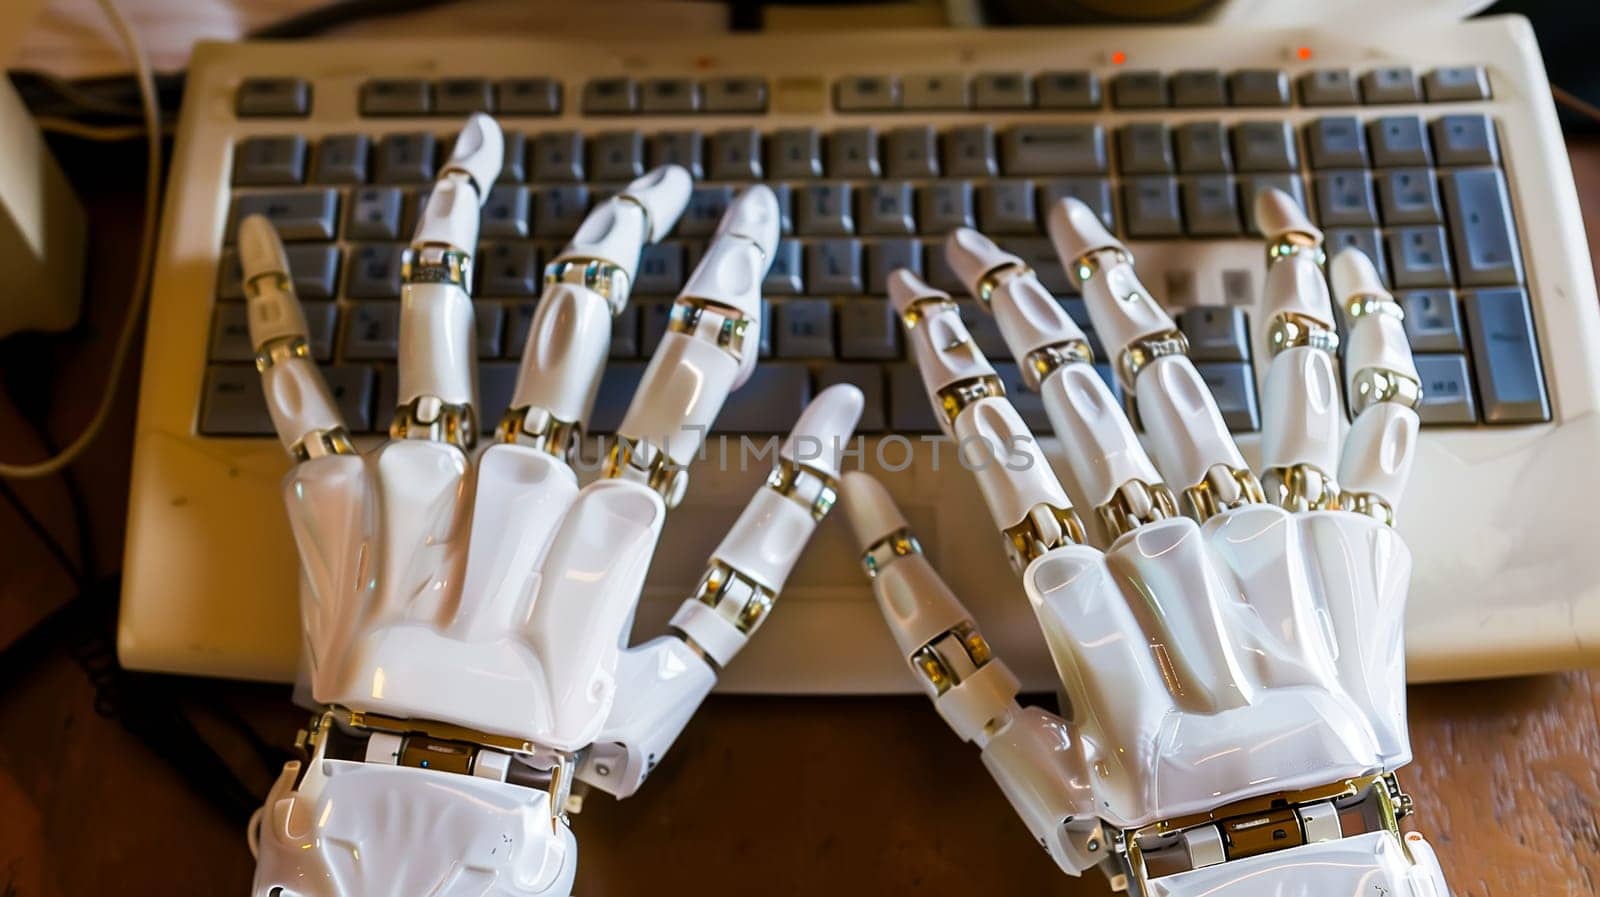 Robot hands using laptop computer typing top angle view artificial intelligence digital futuristic technology concept flat horizontal.